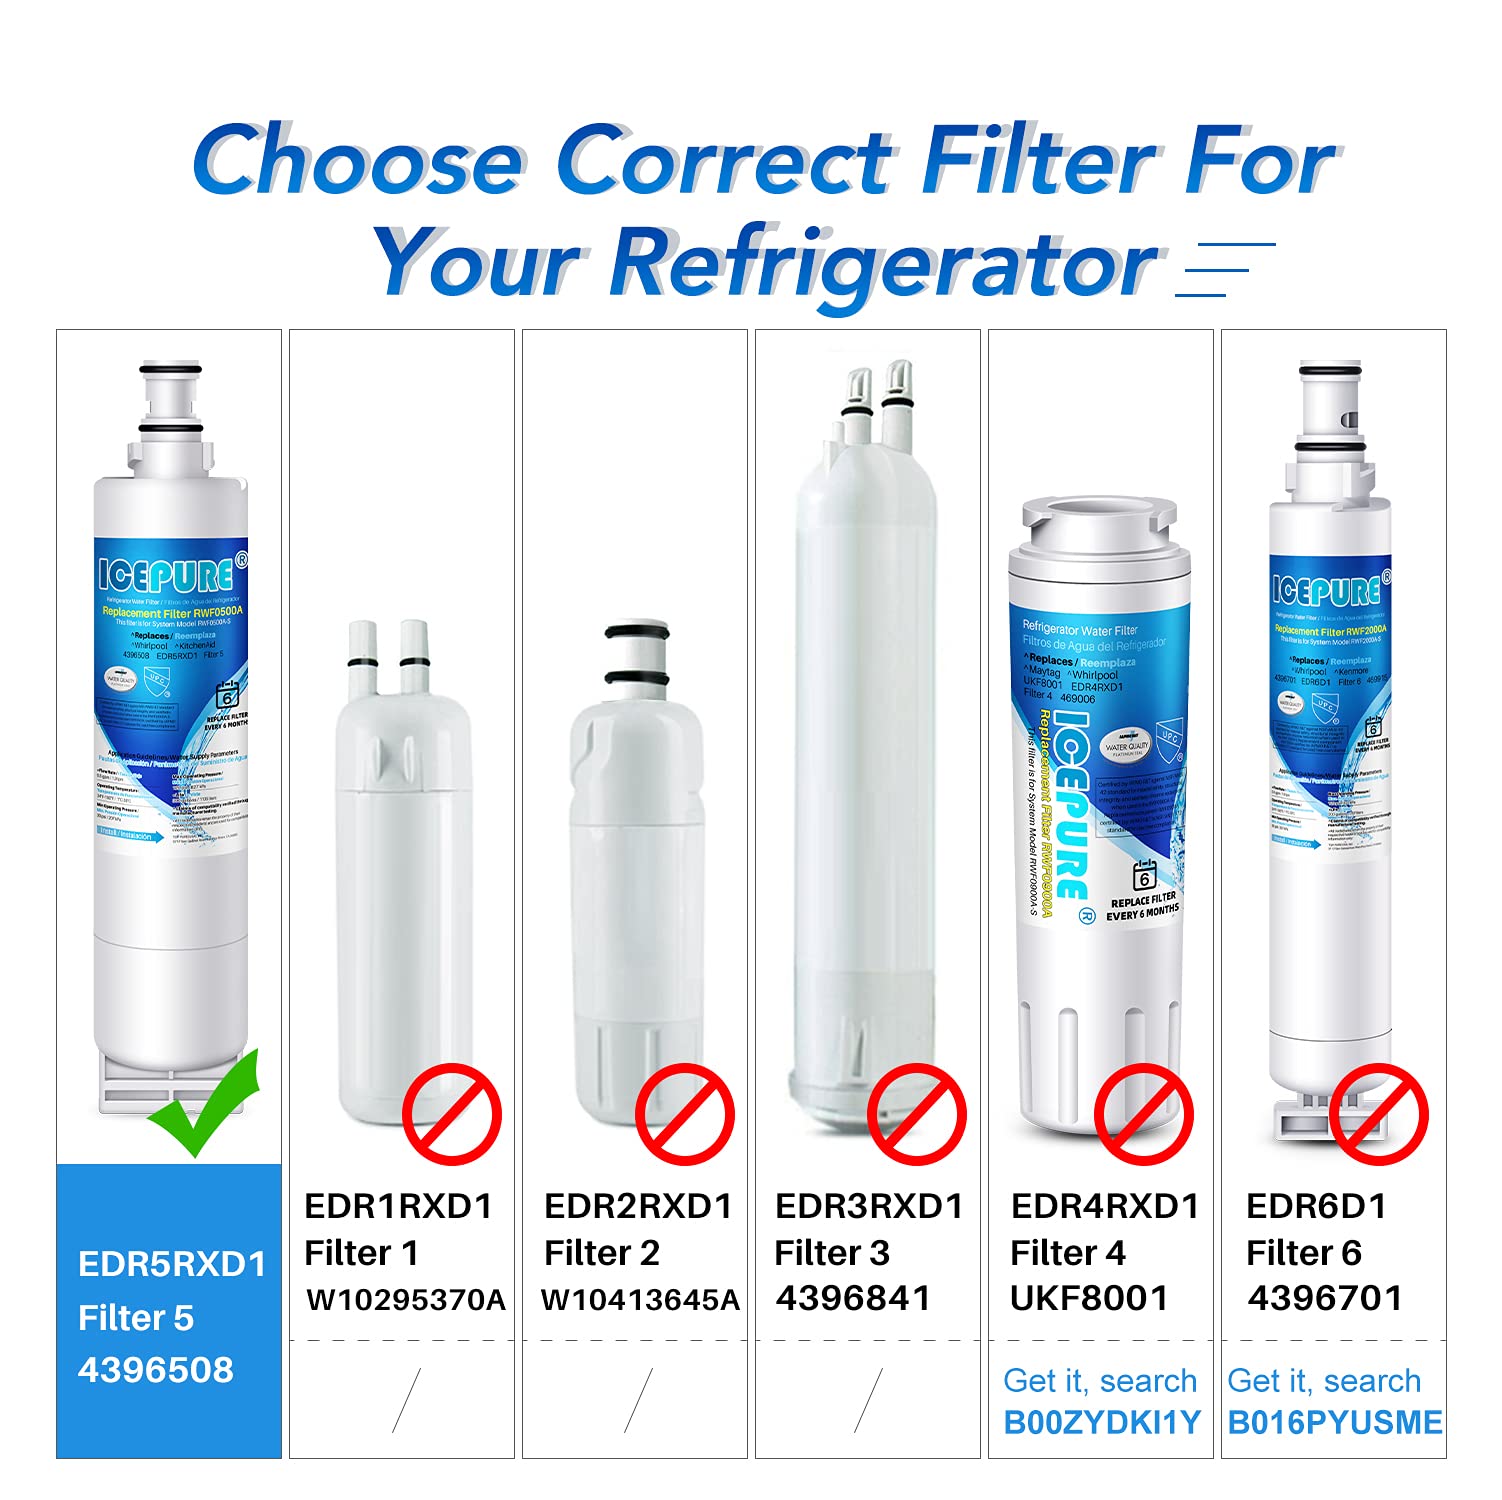 ICEPURE 4396508 Refrigerator Water Filter Replacement for EveryDrop Filter 5, EDR5RXD1, Whirlpool 4392857, NL300, 4396510, 4396509, 4396547, LC400V, 4396510p, WF-NLC240V,PNL240V, 2PACK